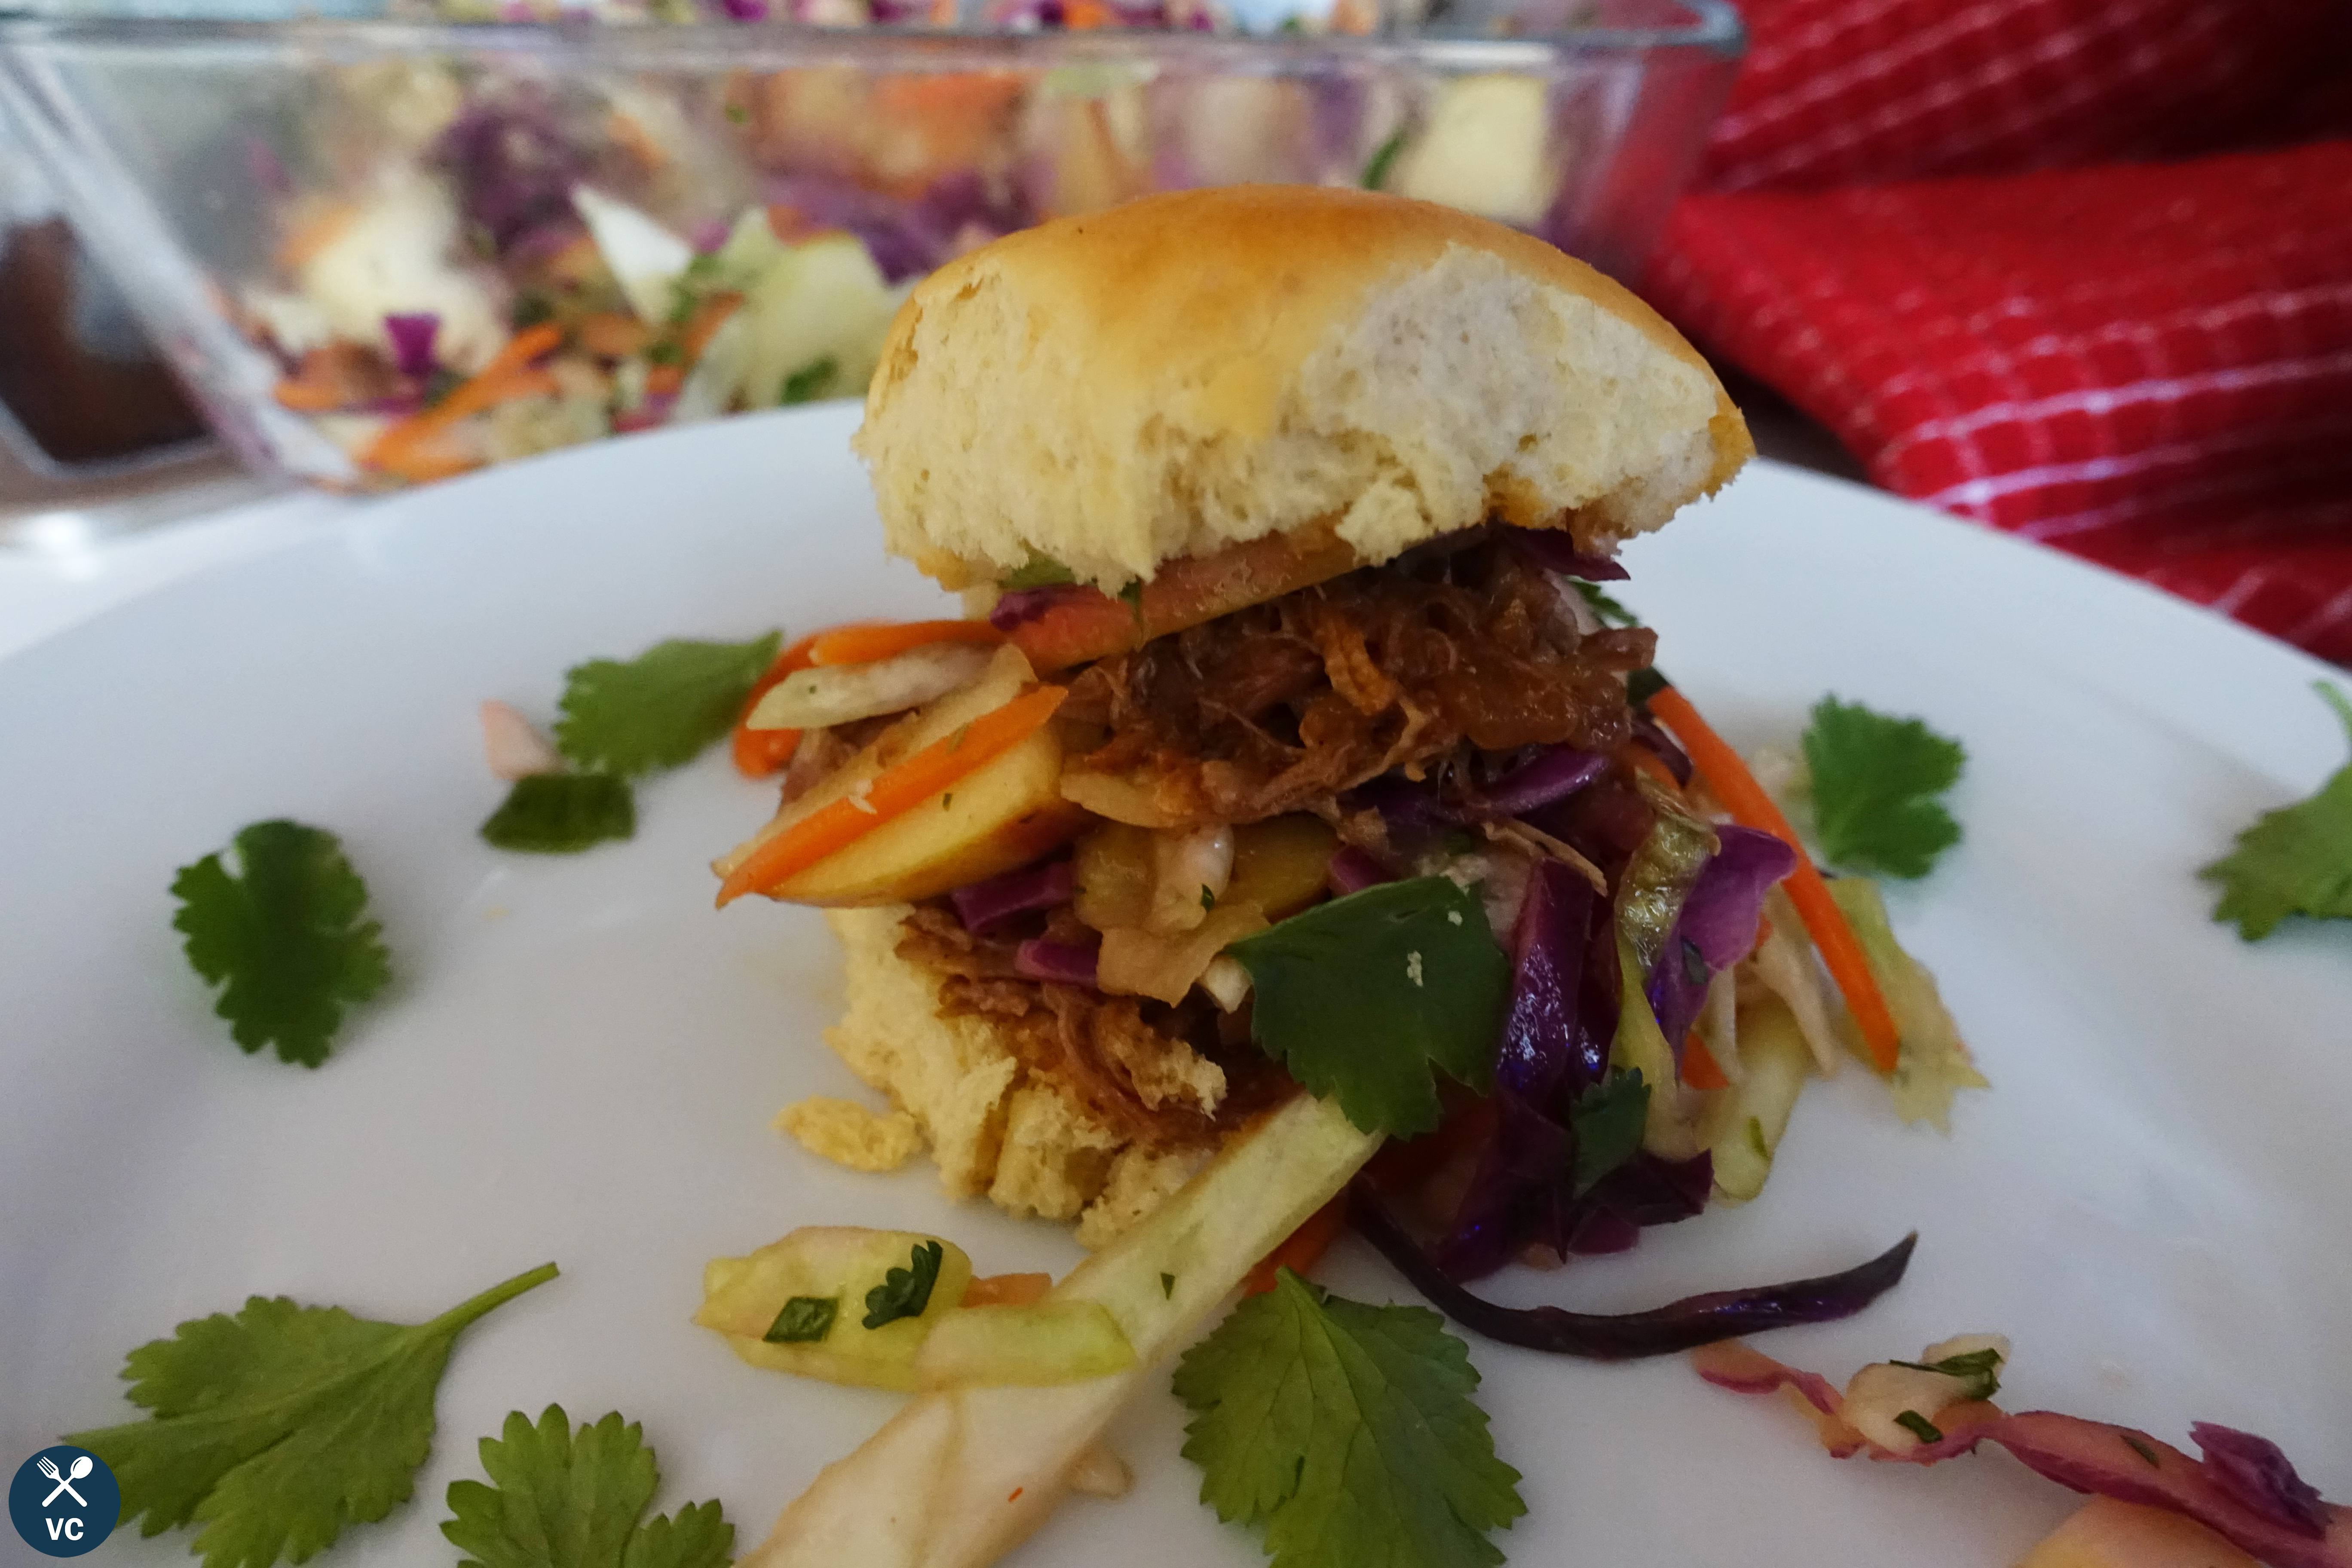 Spicy Asian Slaw with Pulled Pork Slider (VC in the Kitchen)